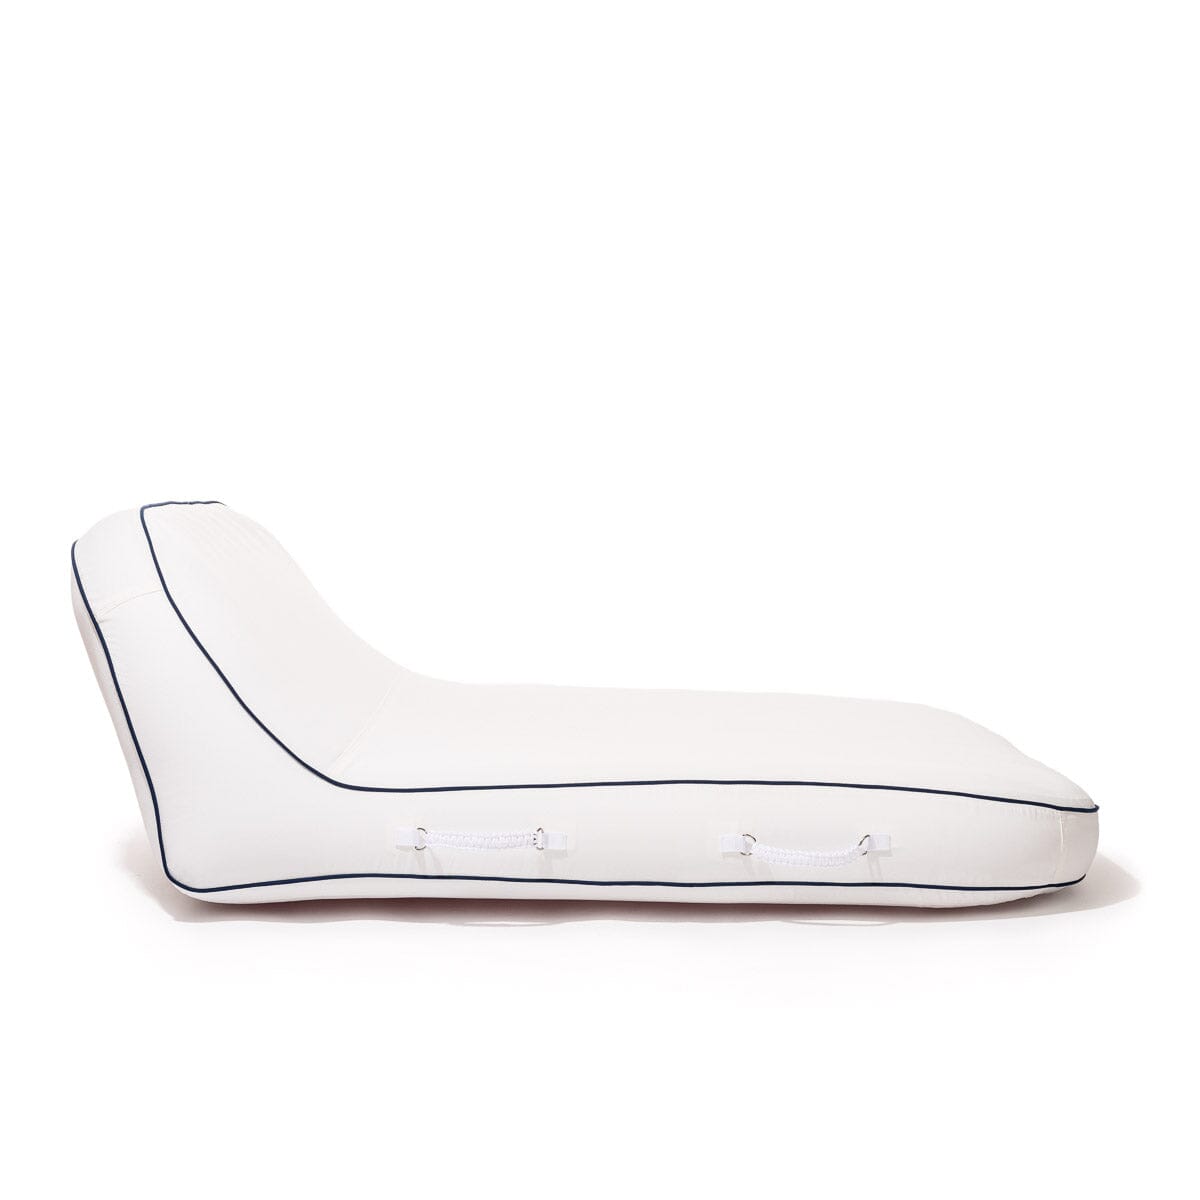 The XL Pool Lounger - Rivie White Pool Lounger Business & Pleasure Co 